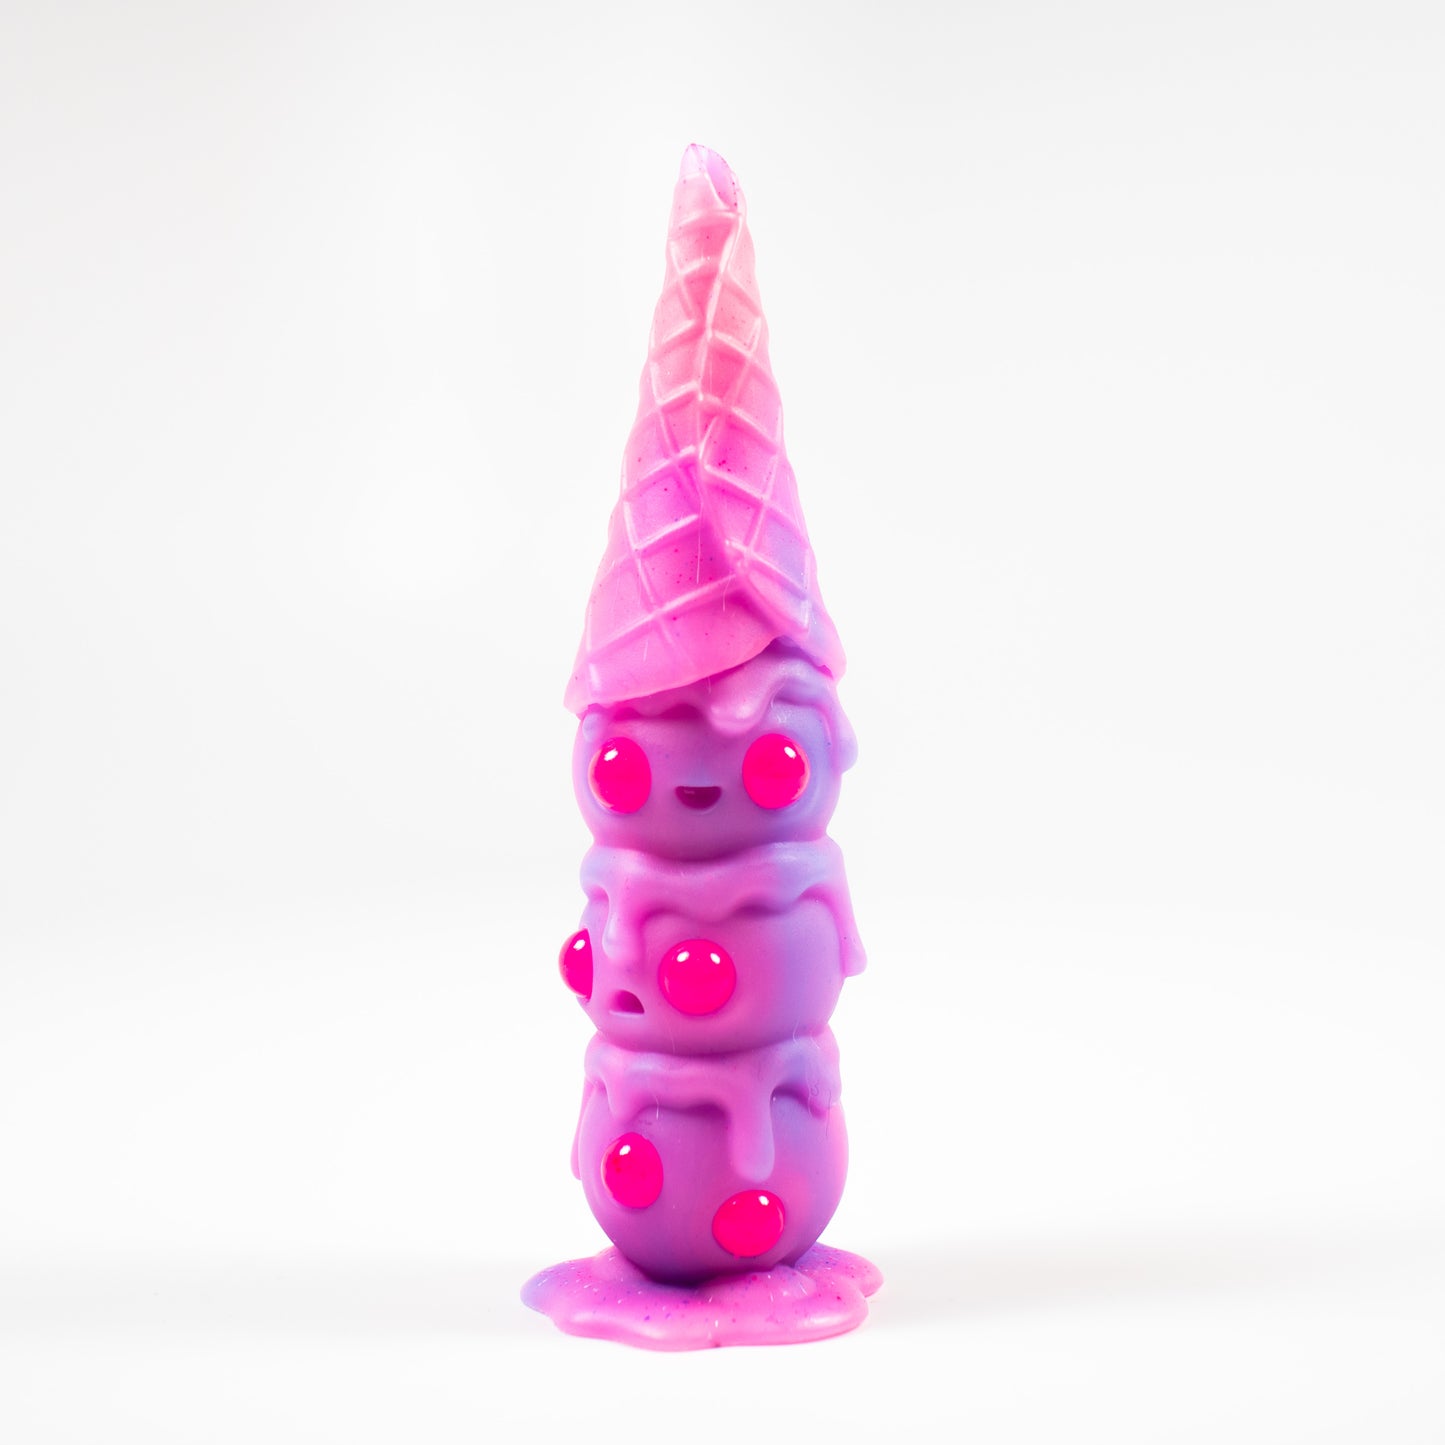 This is Wafull Cotton Candy Swirl Limited Edition Resin Figure